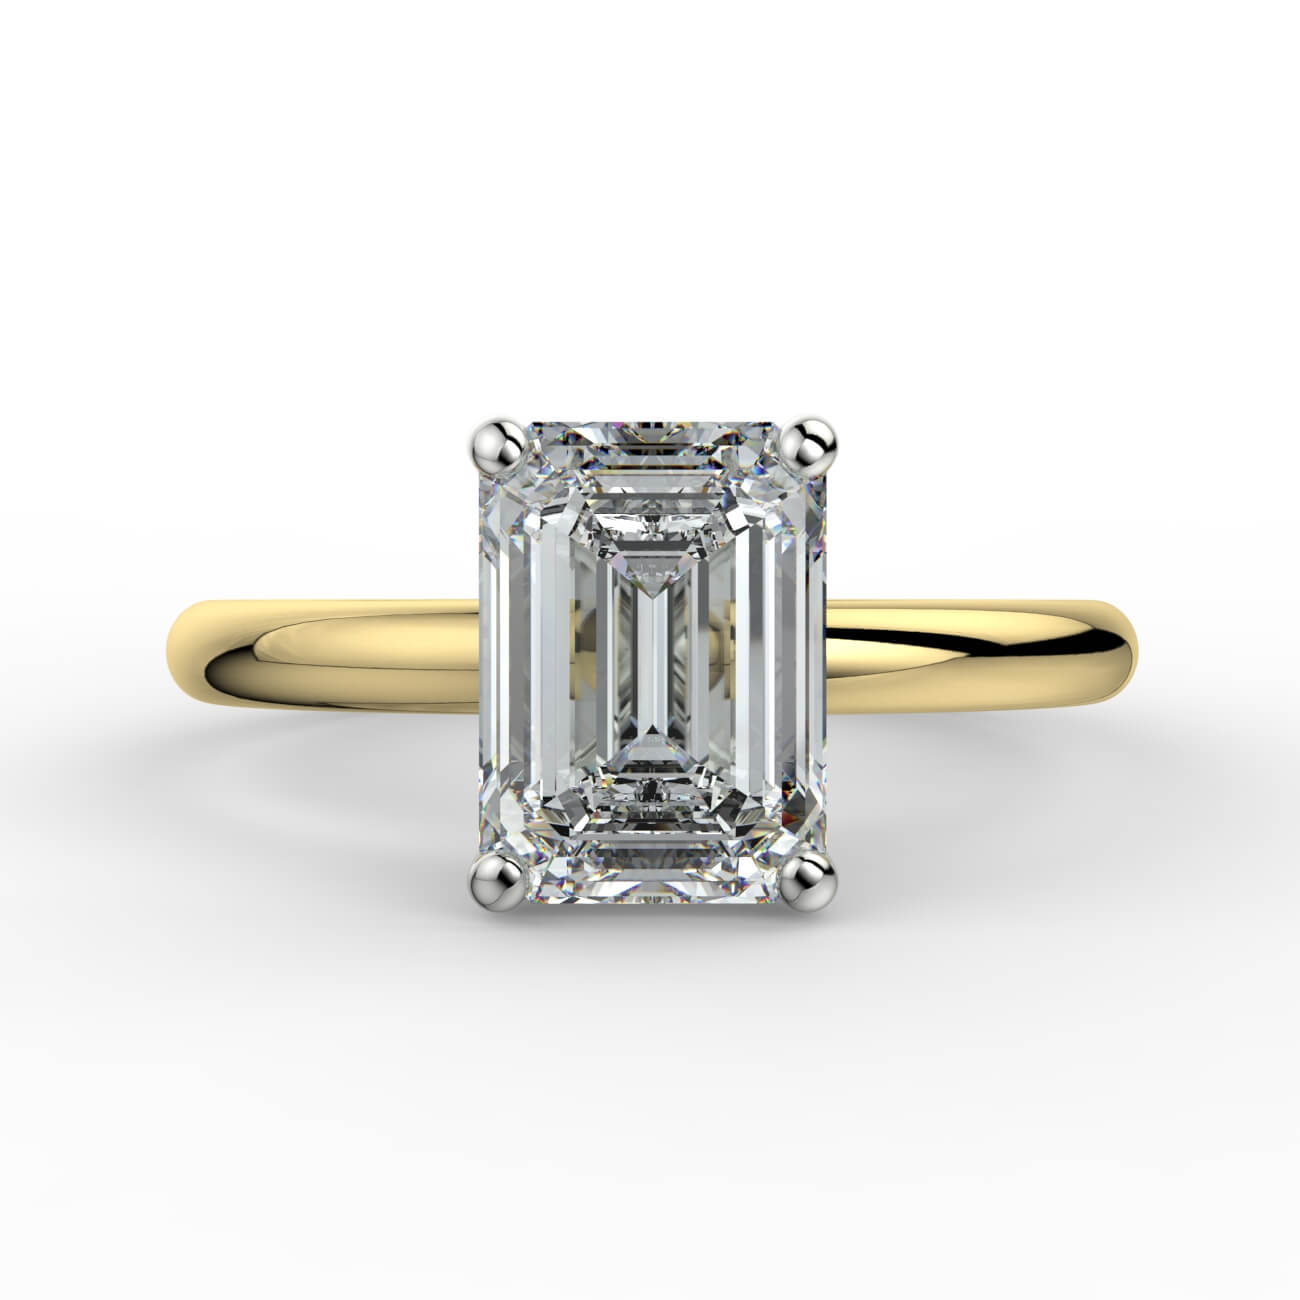 Solitaire emerald cut diamond engagement ring in white and yellow gold – Australian Diamond Network